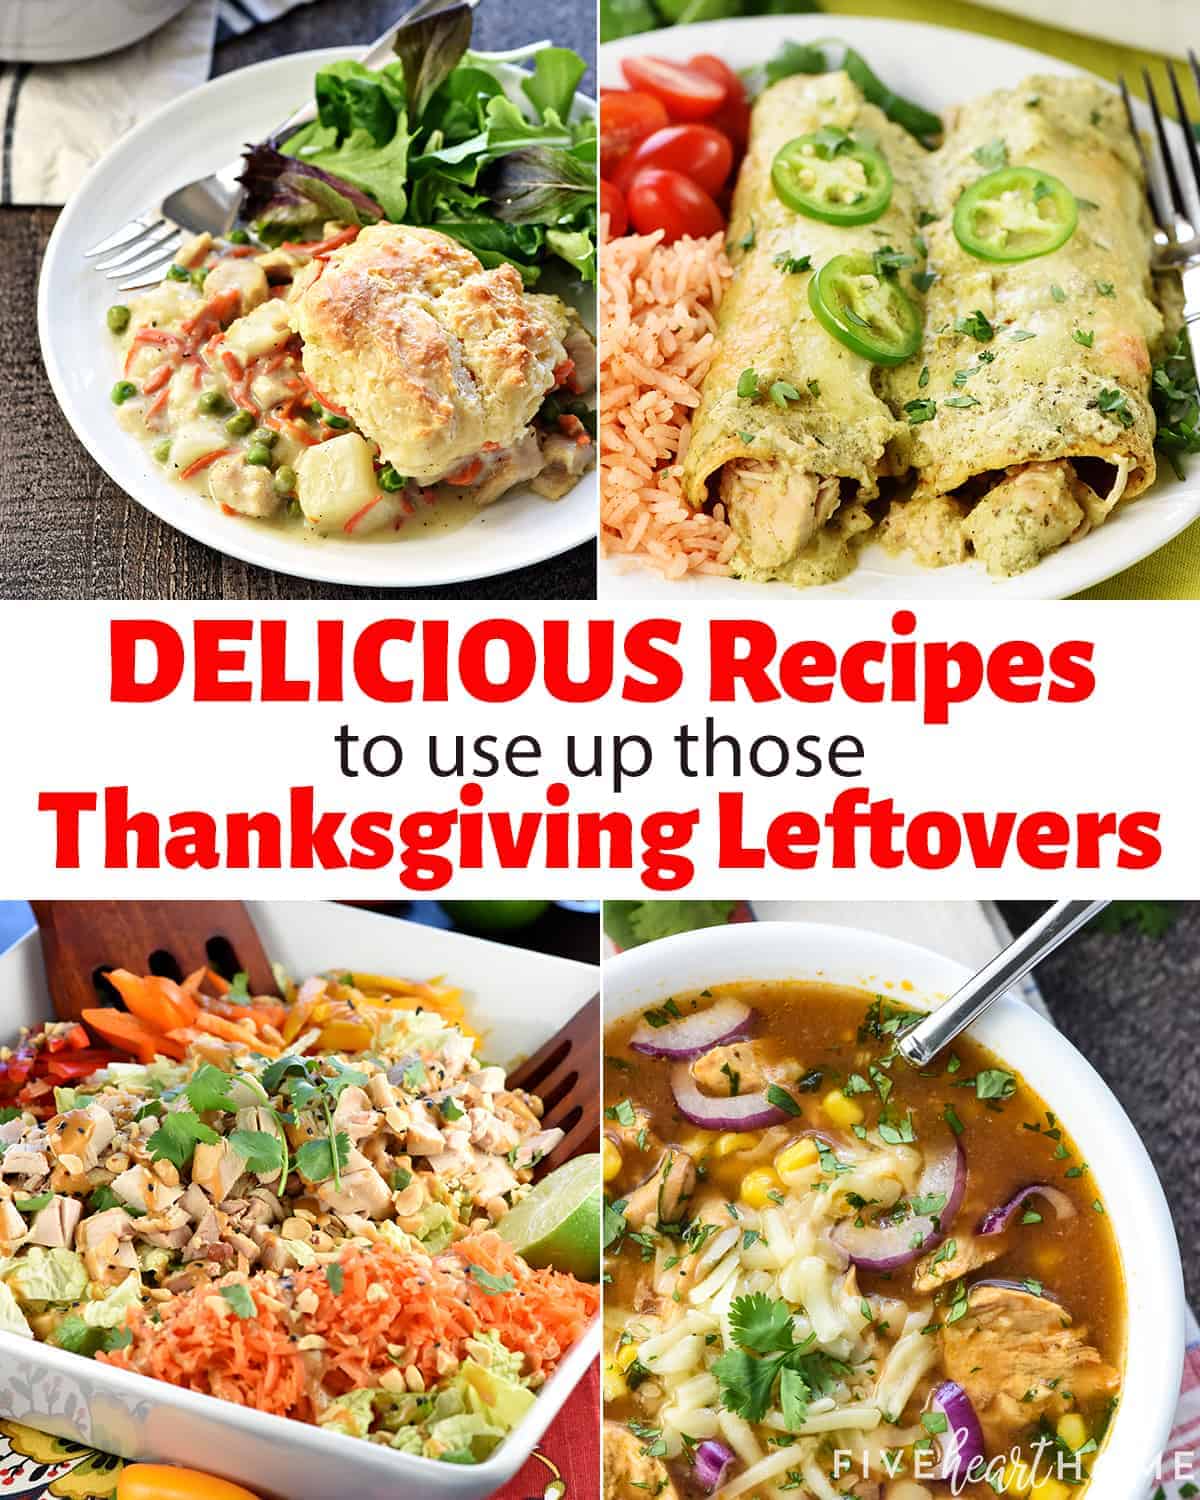 Delicious Recipes to use up Thanksgiving Leftovers ~ this tasty collection of recipes is full of ideas for using up leftover turkey, leftover ham, and even leftover mashed potatoes! | FiveHeartHome.com via @fivehearthome